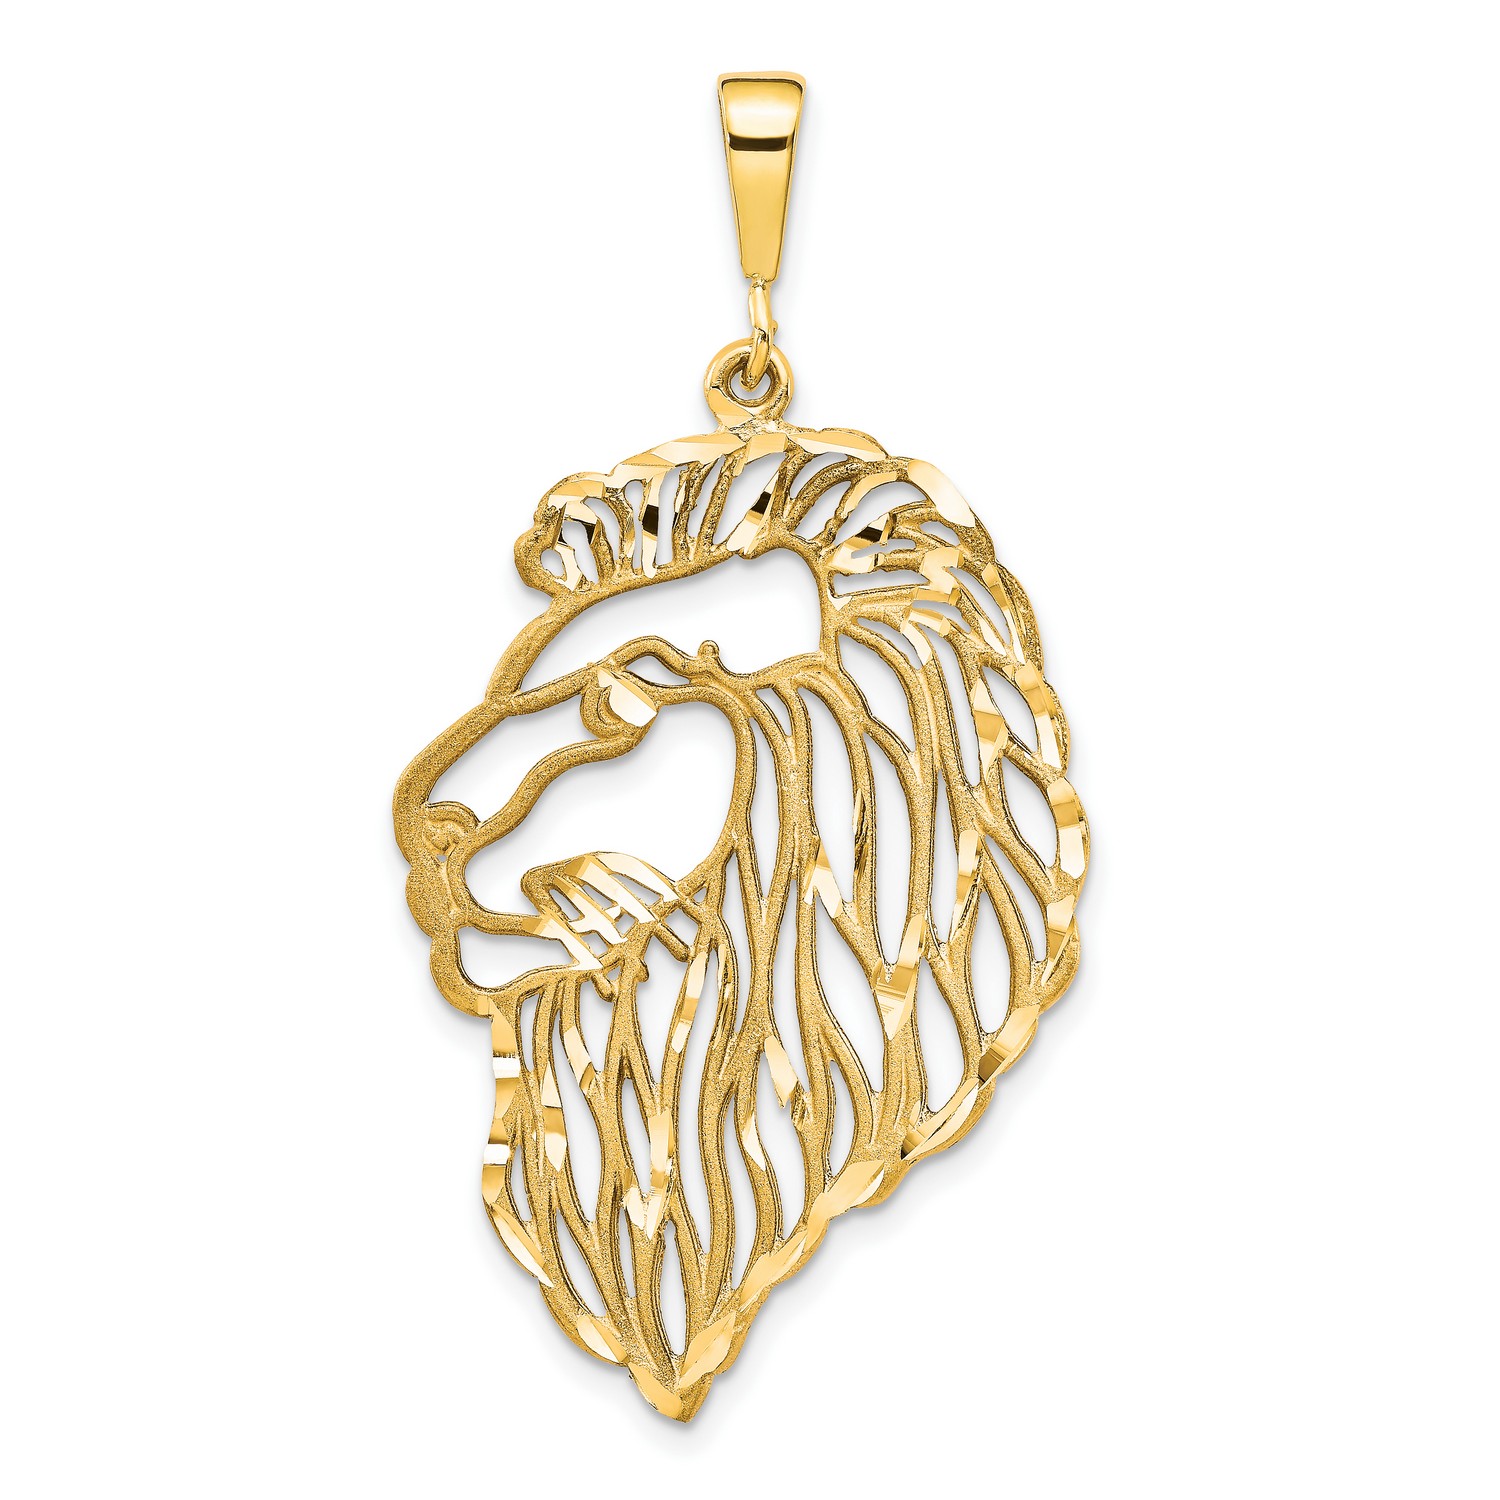 Pre-owned Jewelry Stores Network 14k Yellow Gold Open Filigree Male Lions Head Charm Pendant